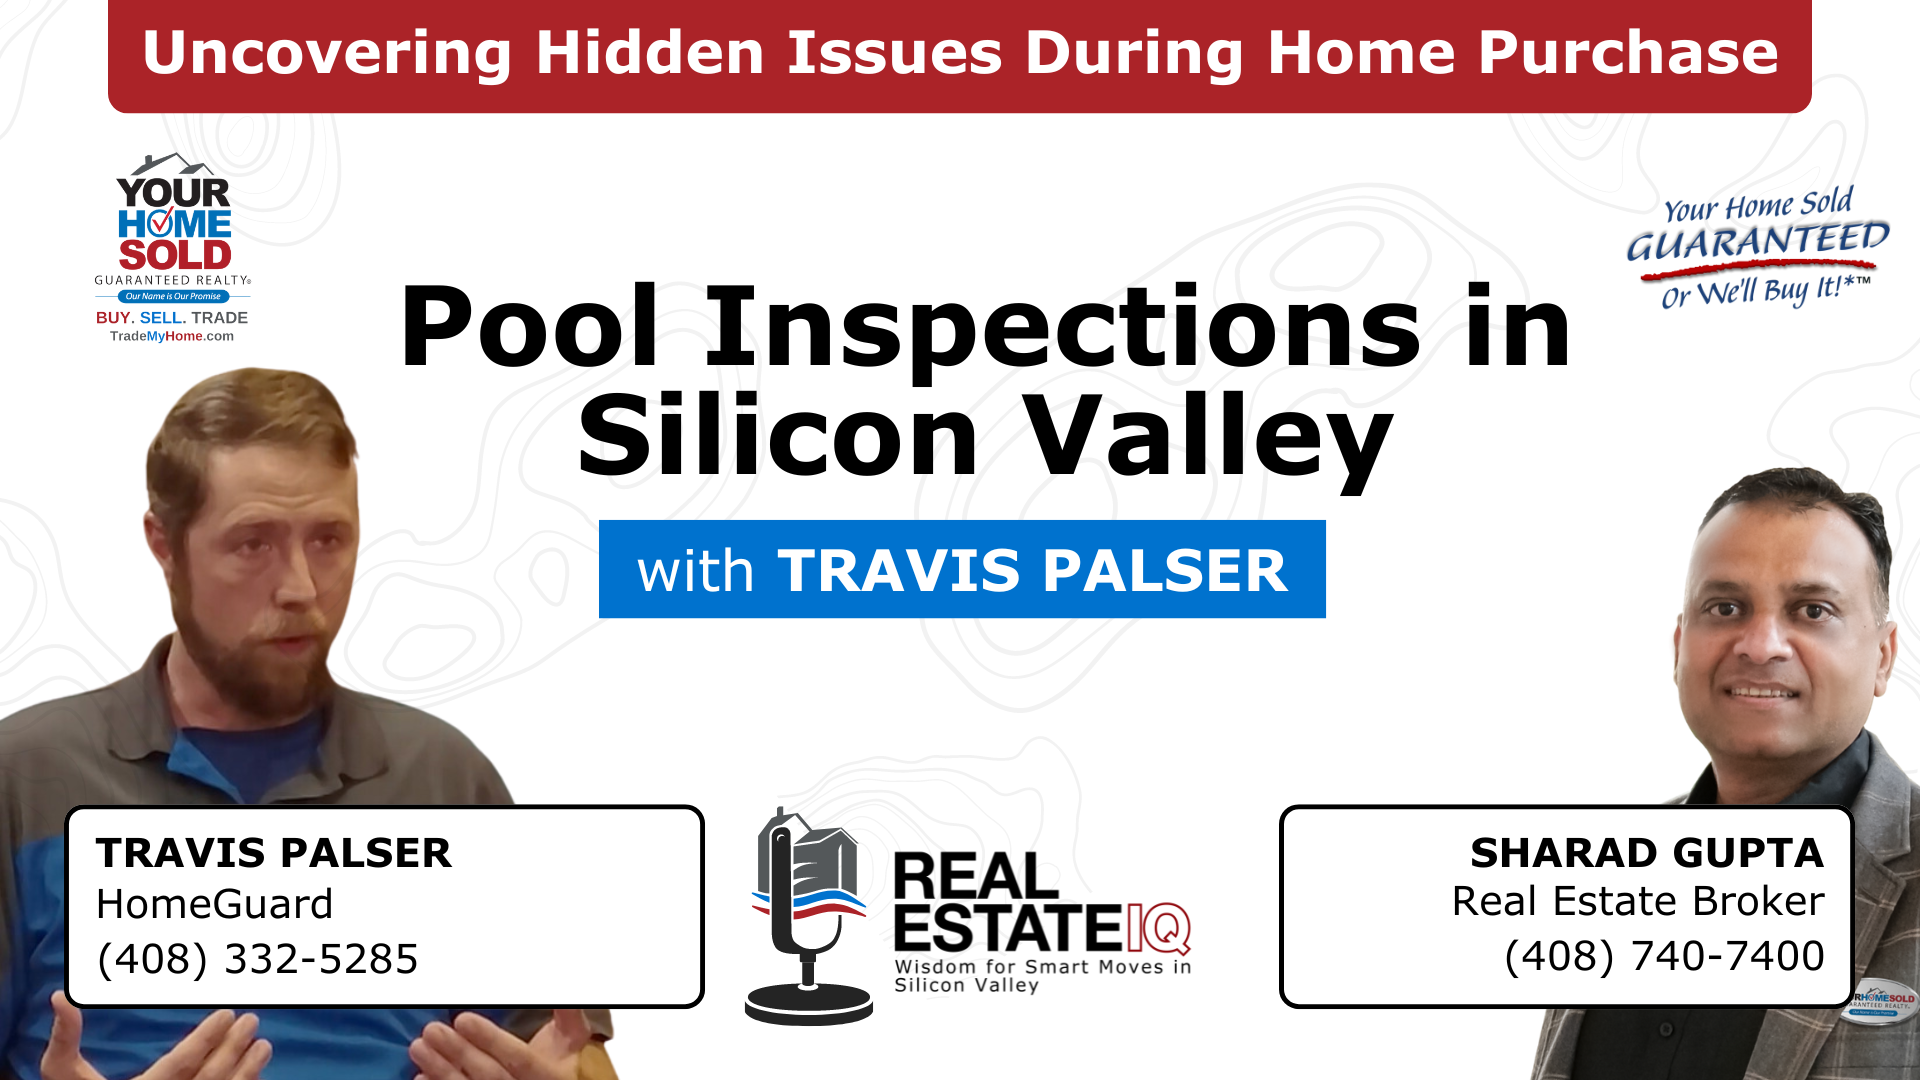 Pool Inspections: Uncovering Hidden Issues During Home Purchase in Silicon Valley Video